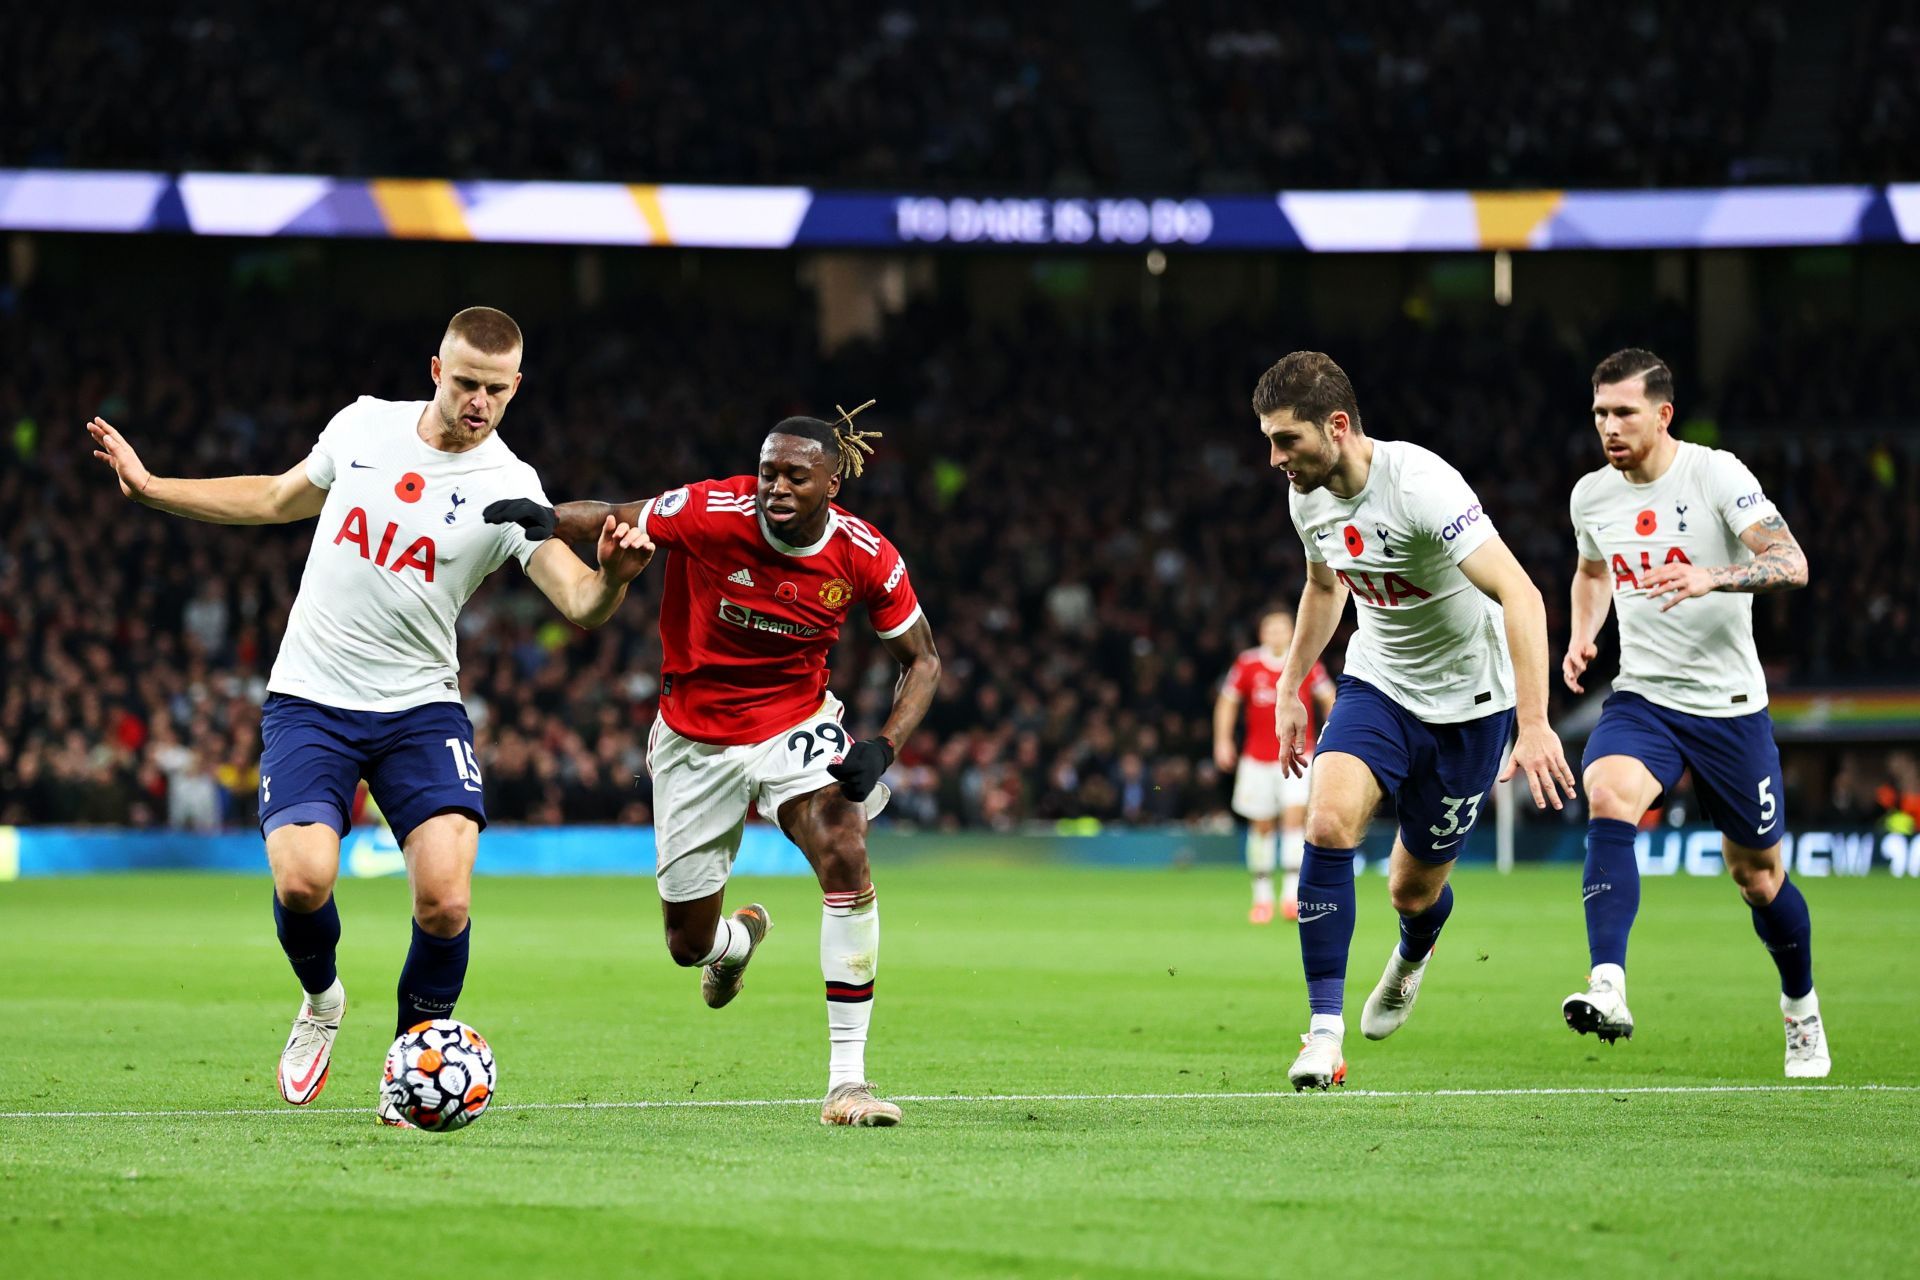 Manchester United&#039;s Aaron Wan-Bissaka (#29) in action against Tottenham Hotspur